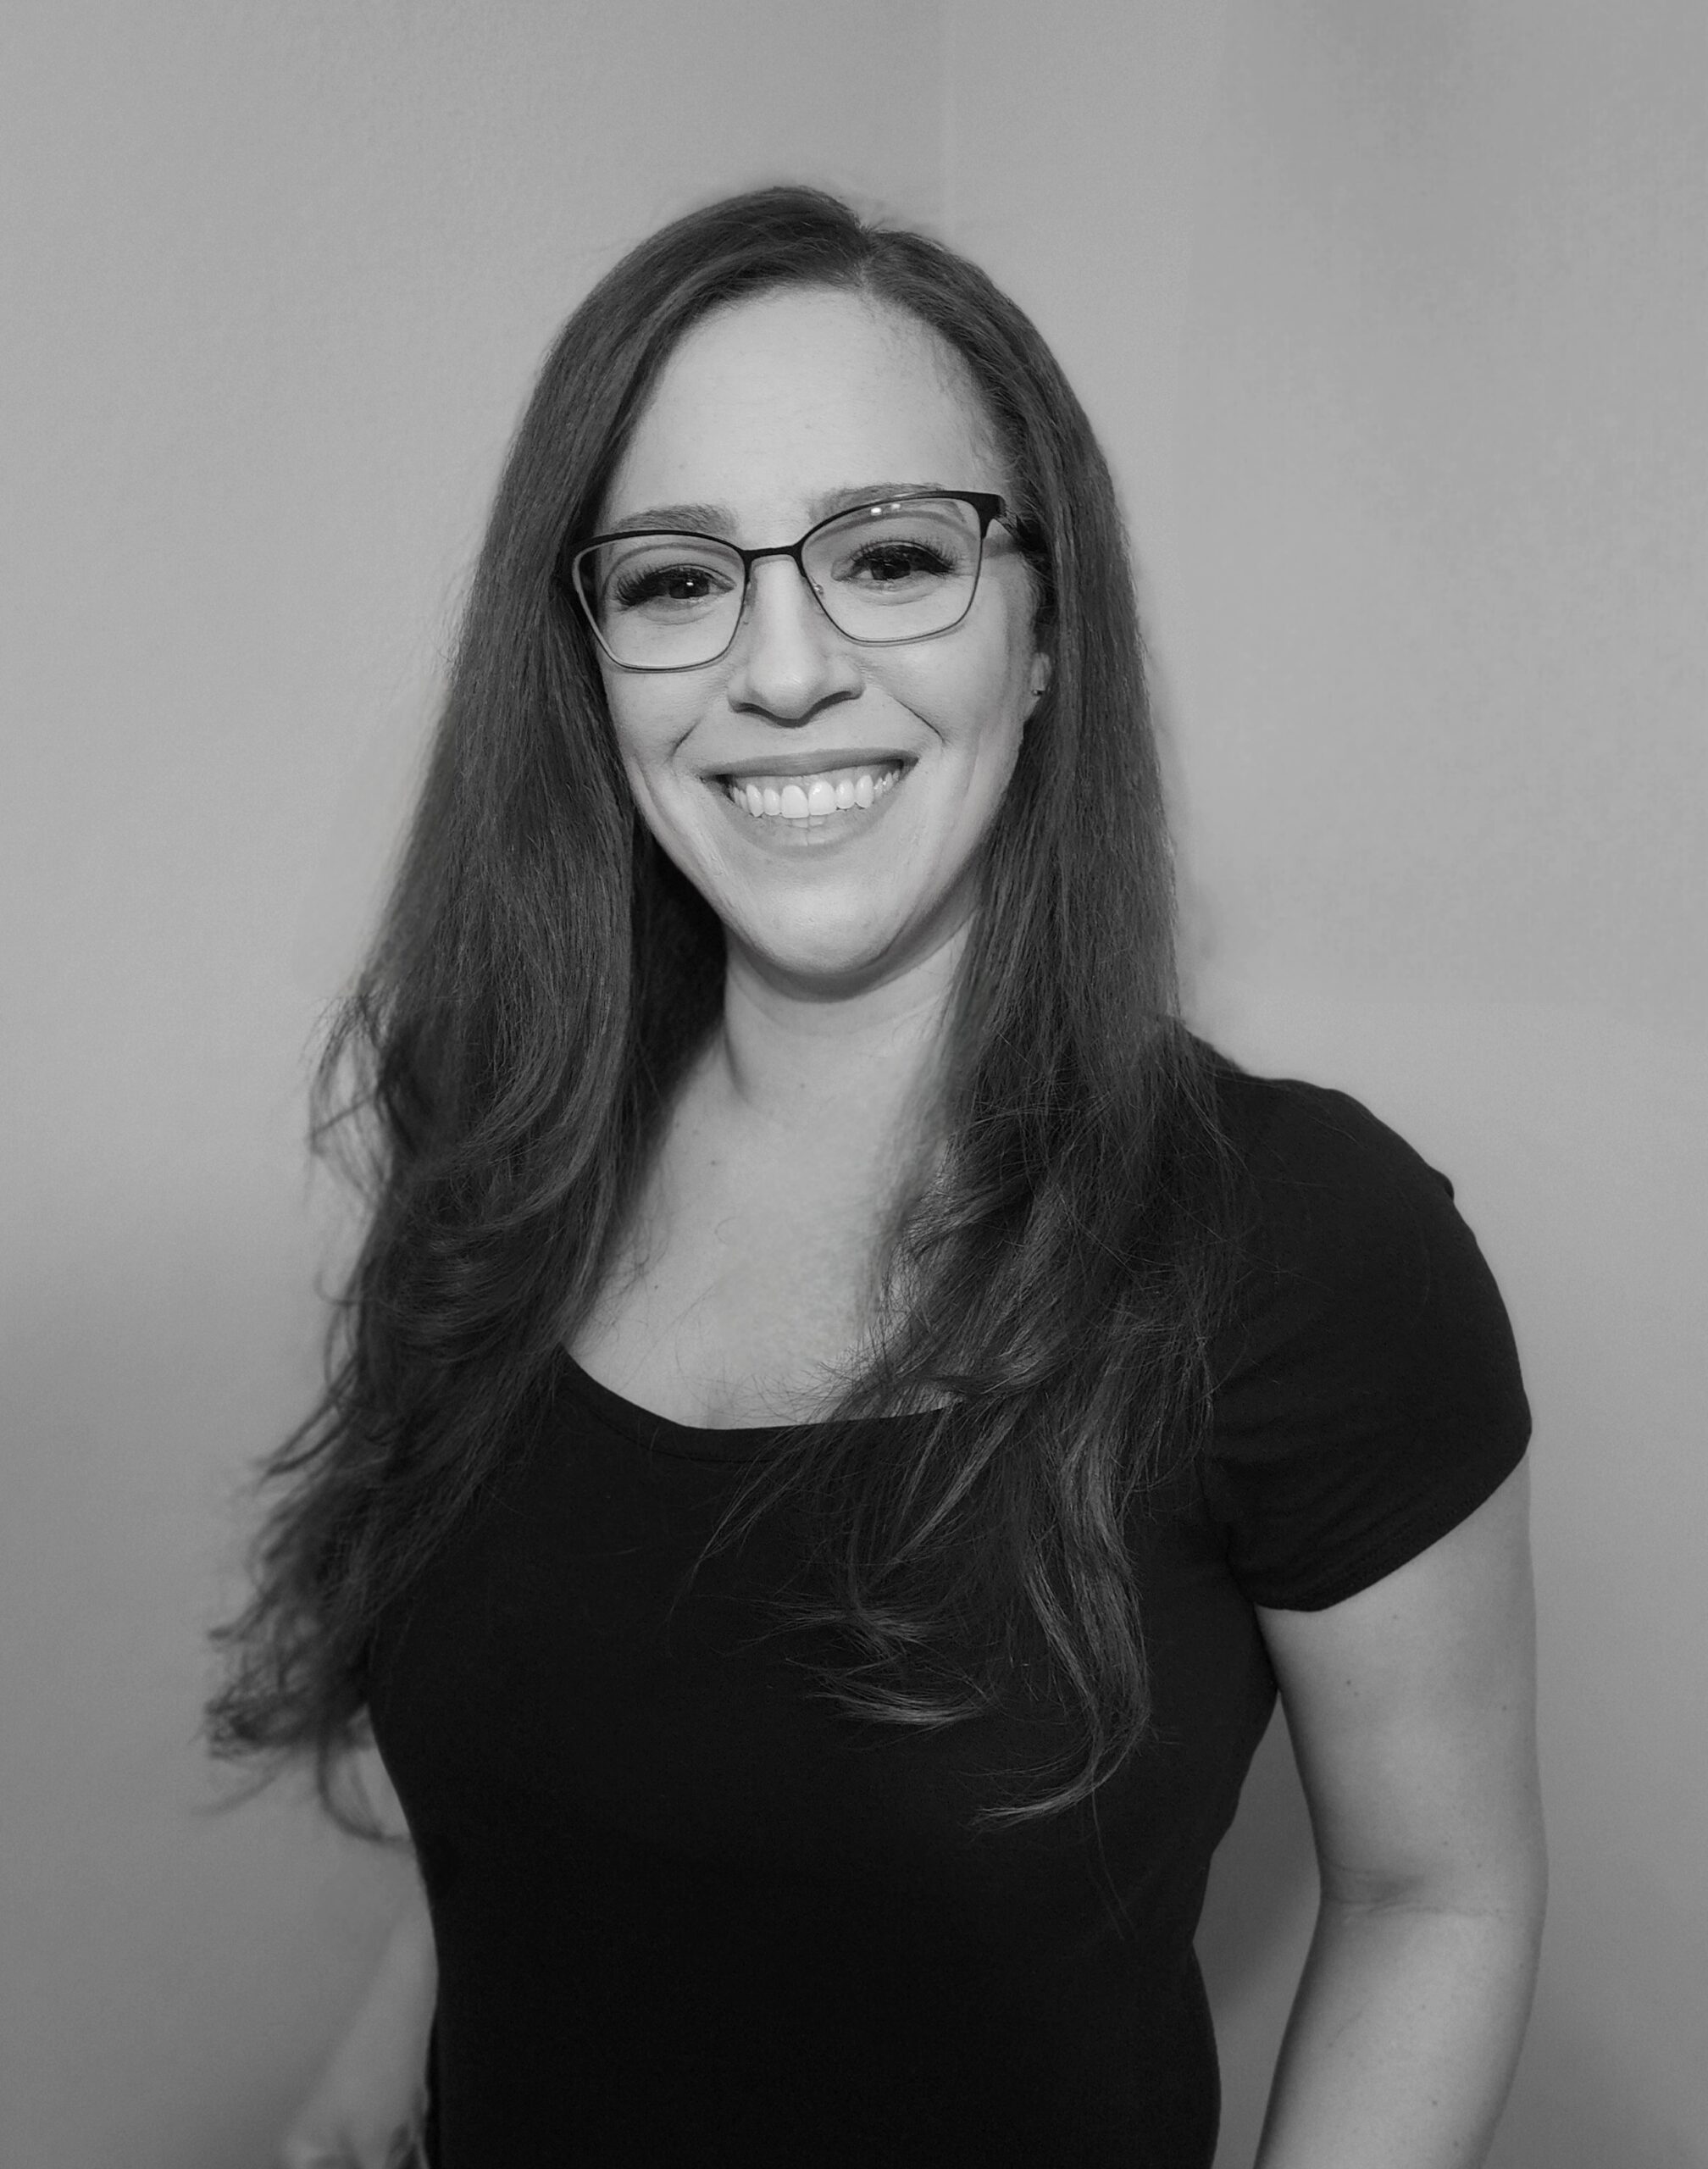 This black and white photo features a waist-up shot of Taneisha, a twenty something woman with long dark hair and glasses, who is wearing a dark-colored fitted t-shirt. She is standing at an angle and looking straight ahead at the viewer and smiling warmly with an open mouth. She is standing against a neutral-colored background.